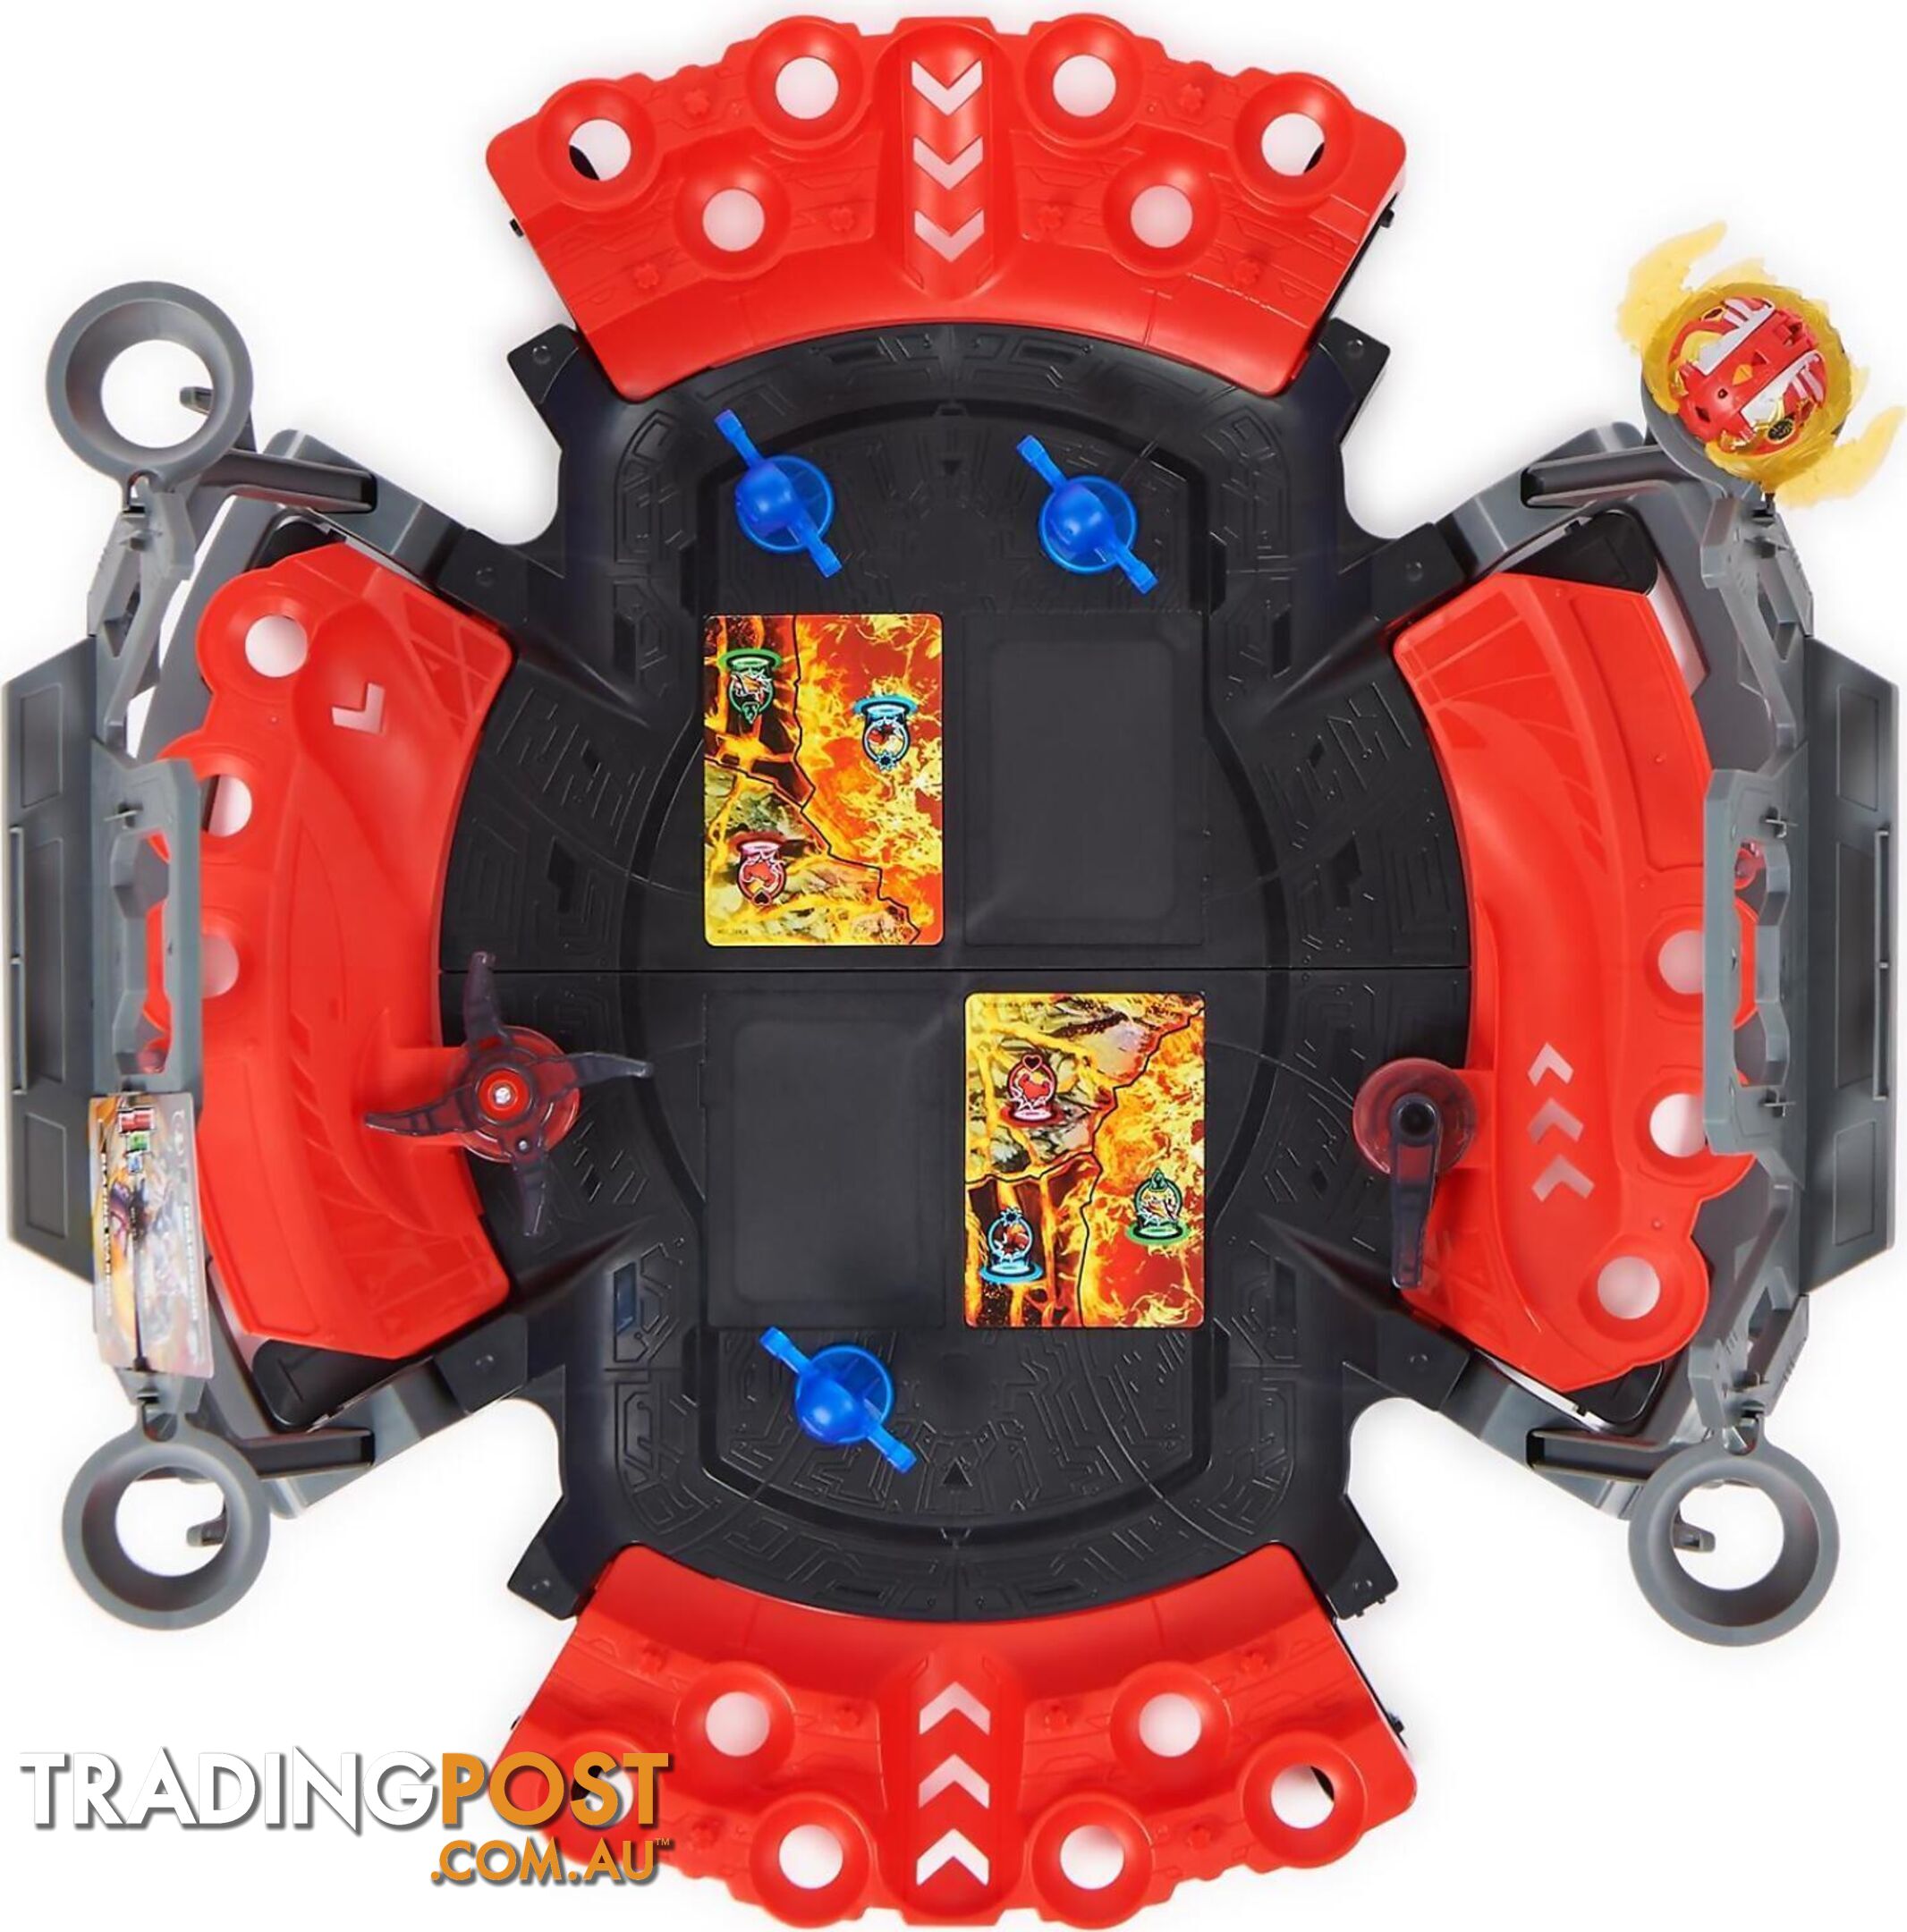 Bakugan - Battle Arena With Exclusive Special Attack Dragonoid Customizable Spinning Action Figure And Playset - Si6067045 - 778988466643